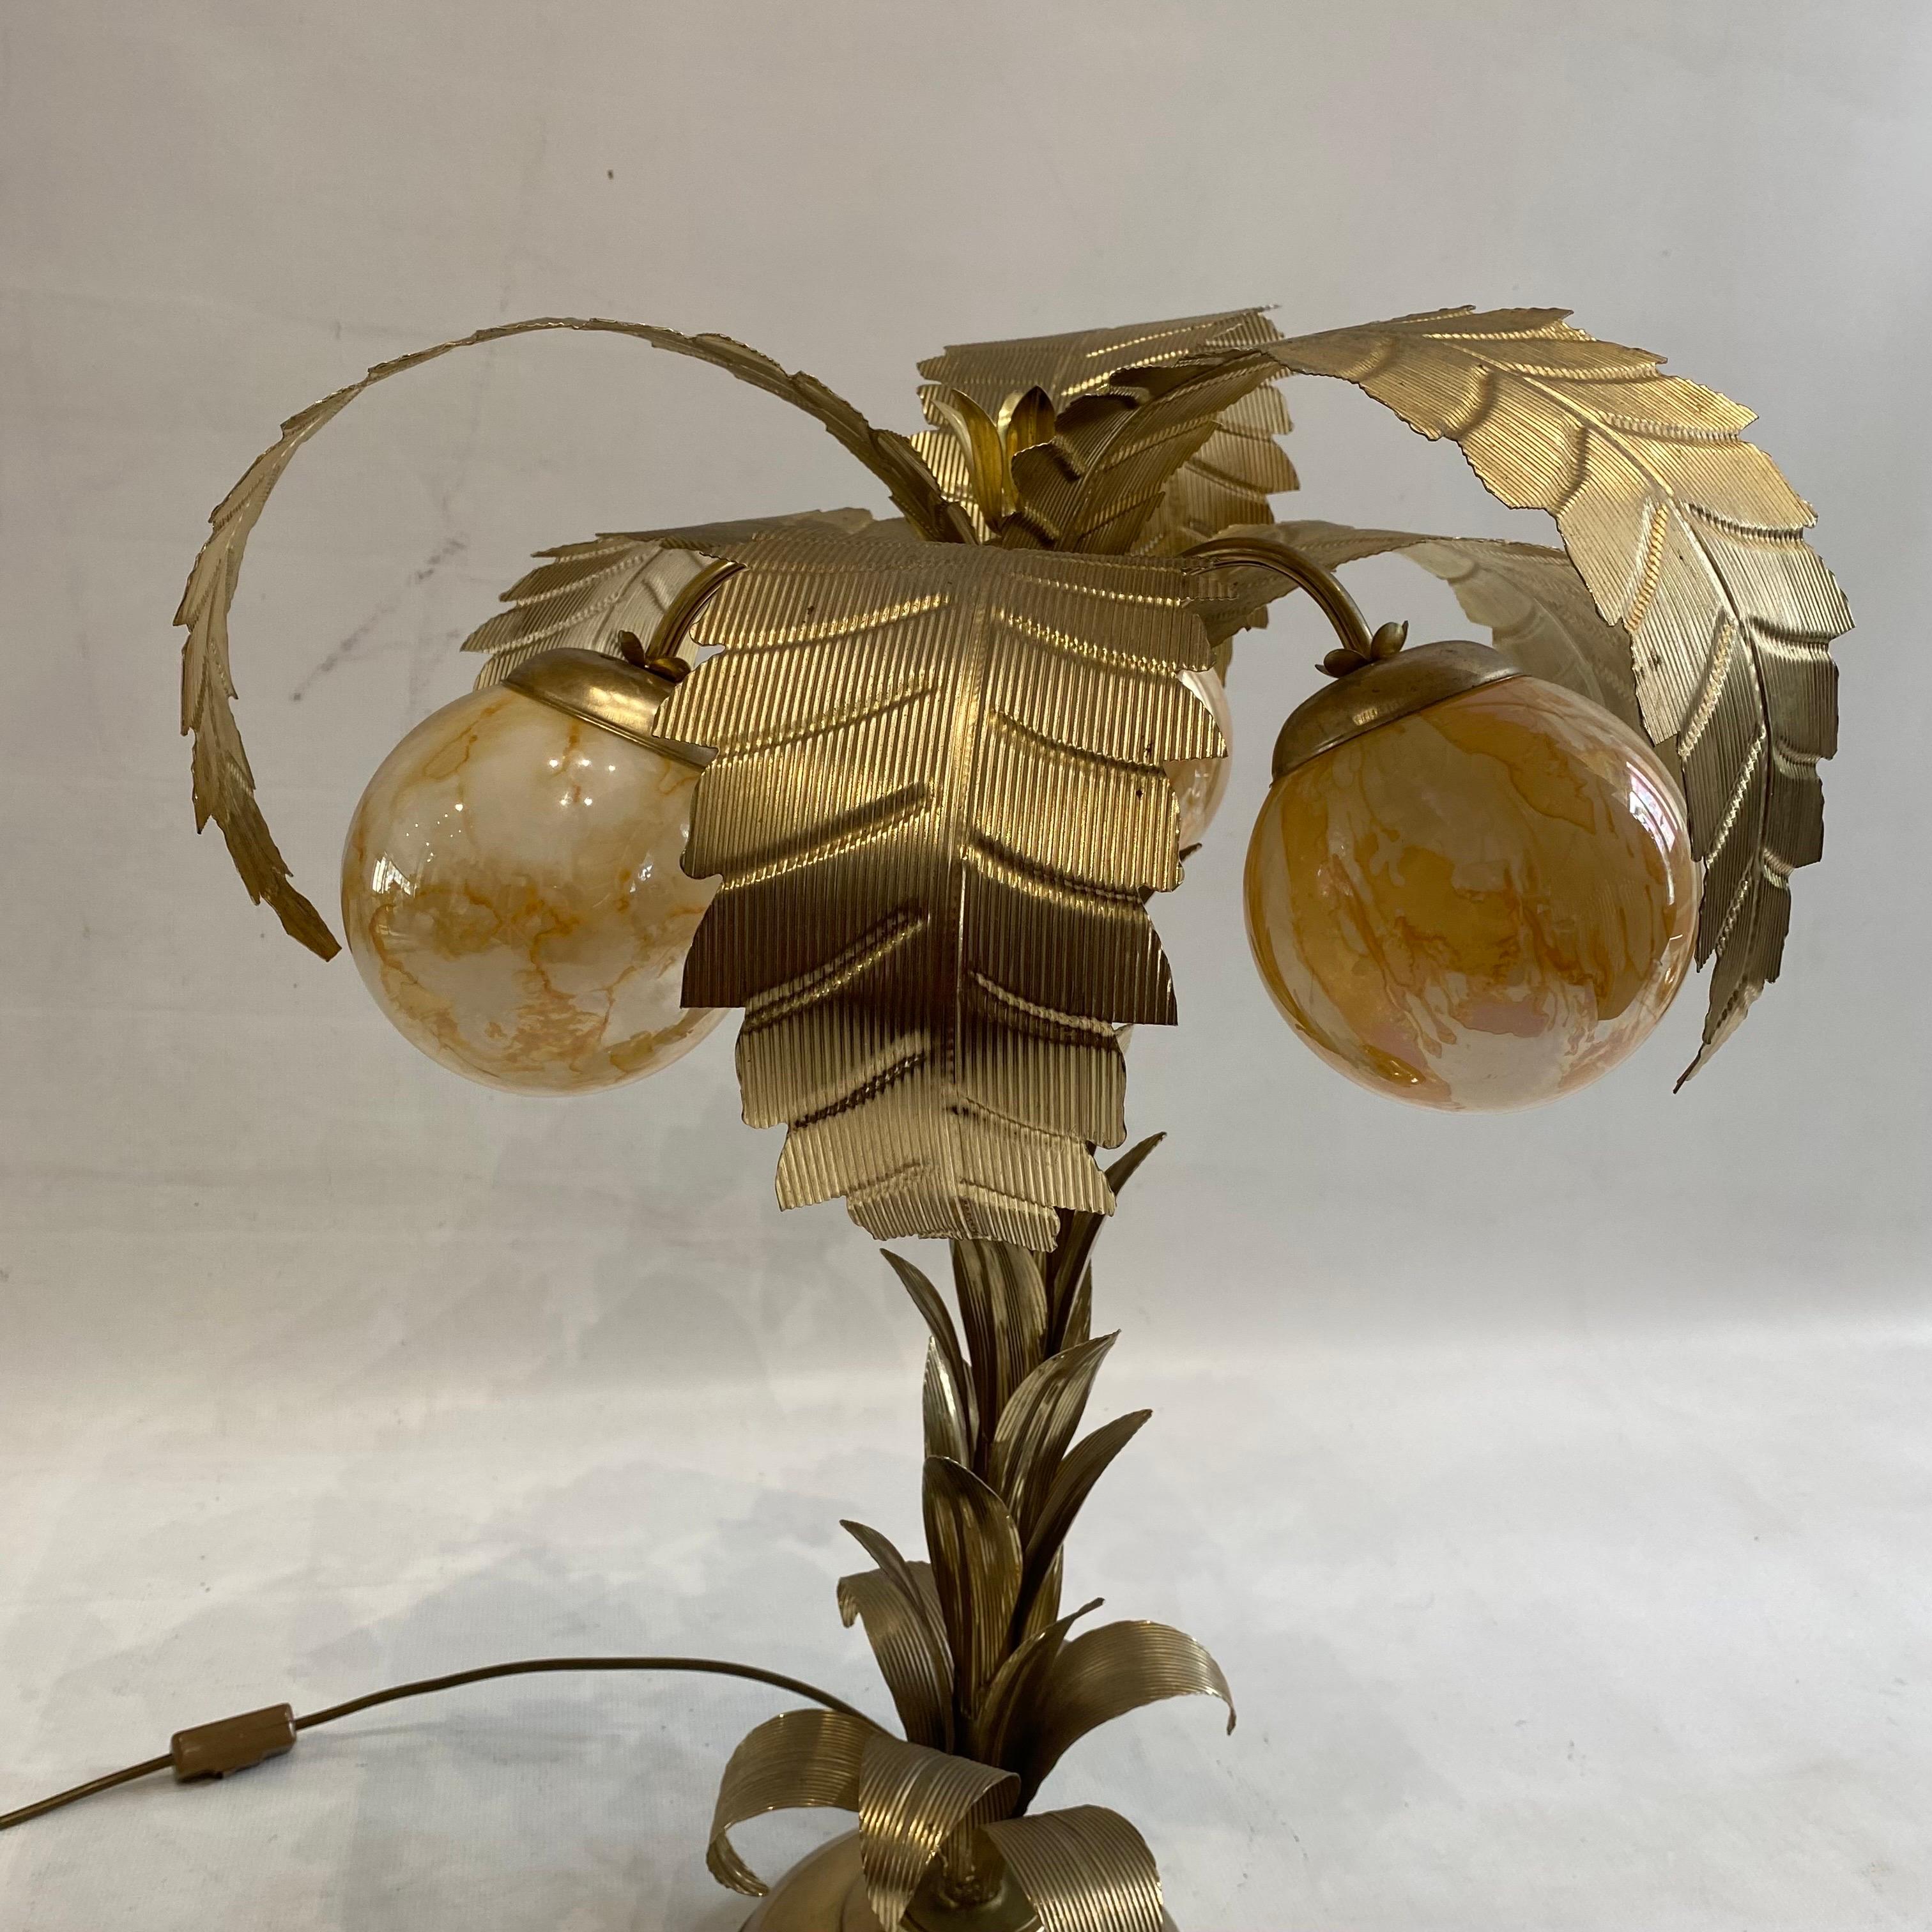 Late 20th Century Brass Palm Tree Table Lamp Hollywood Regency 1970s Art Deco #1 Maison Jansen  For Sale